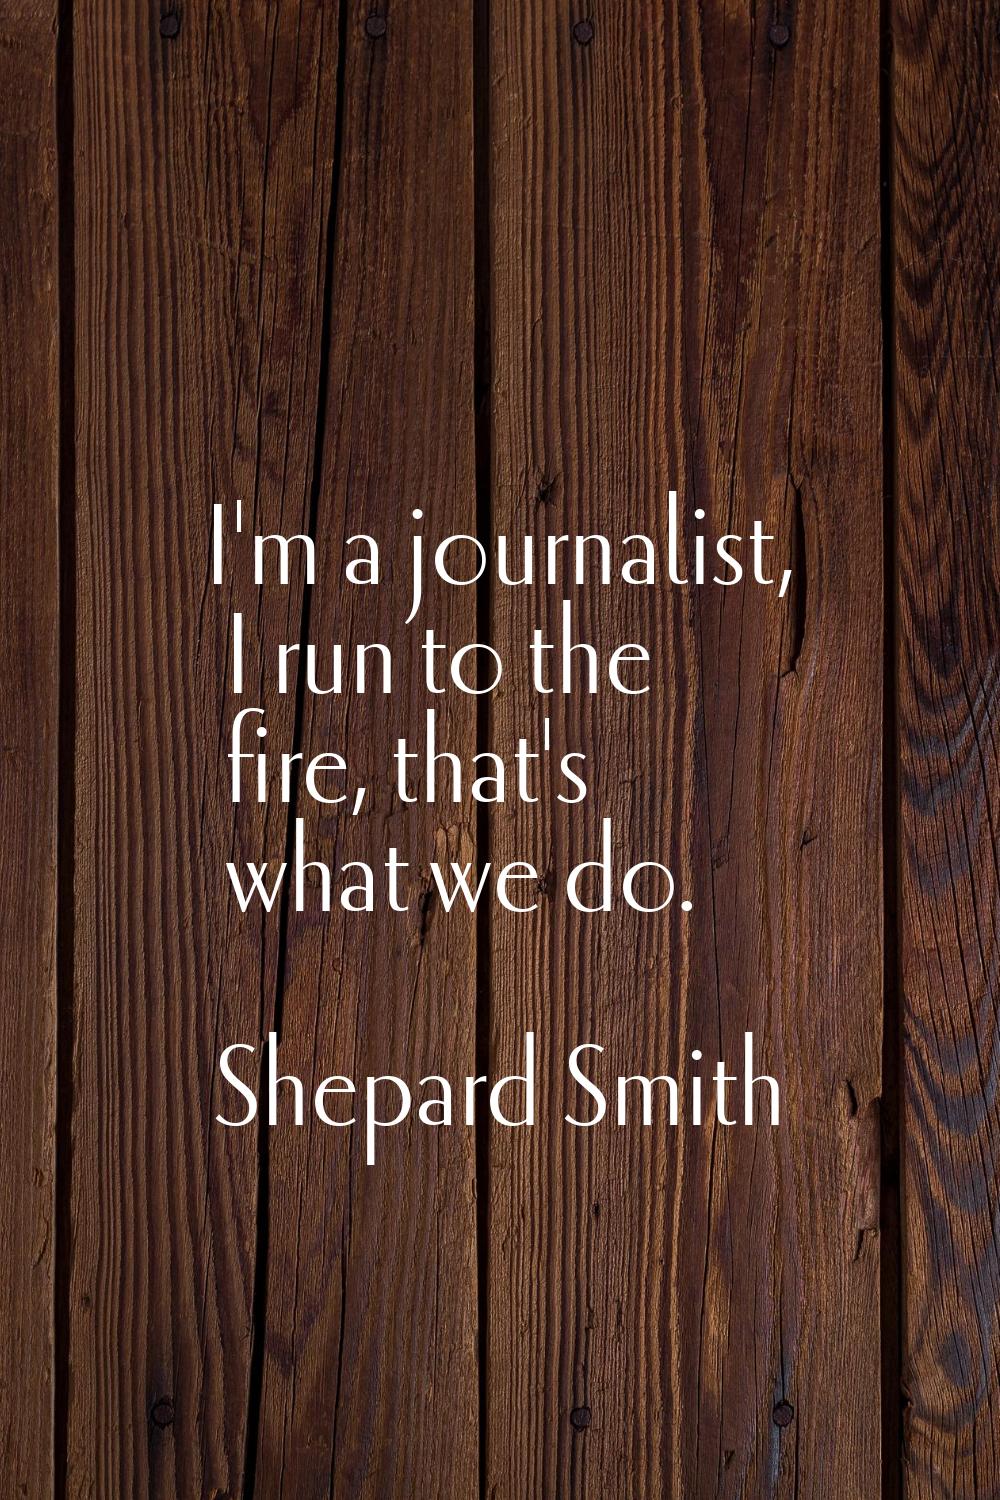 I'm a journalist, I run to the fire, that's what we do.